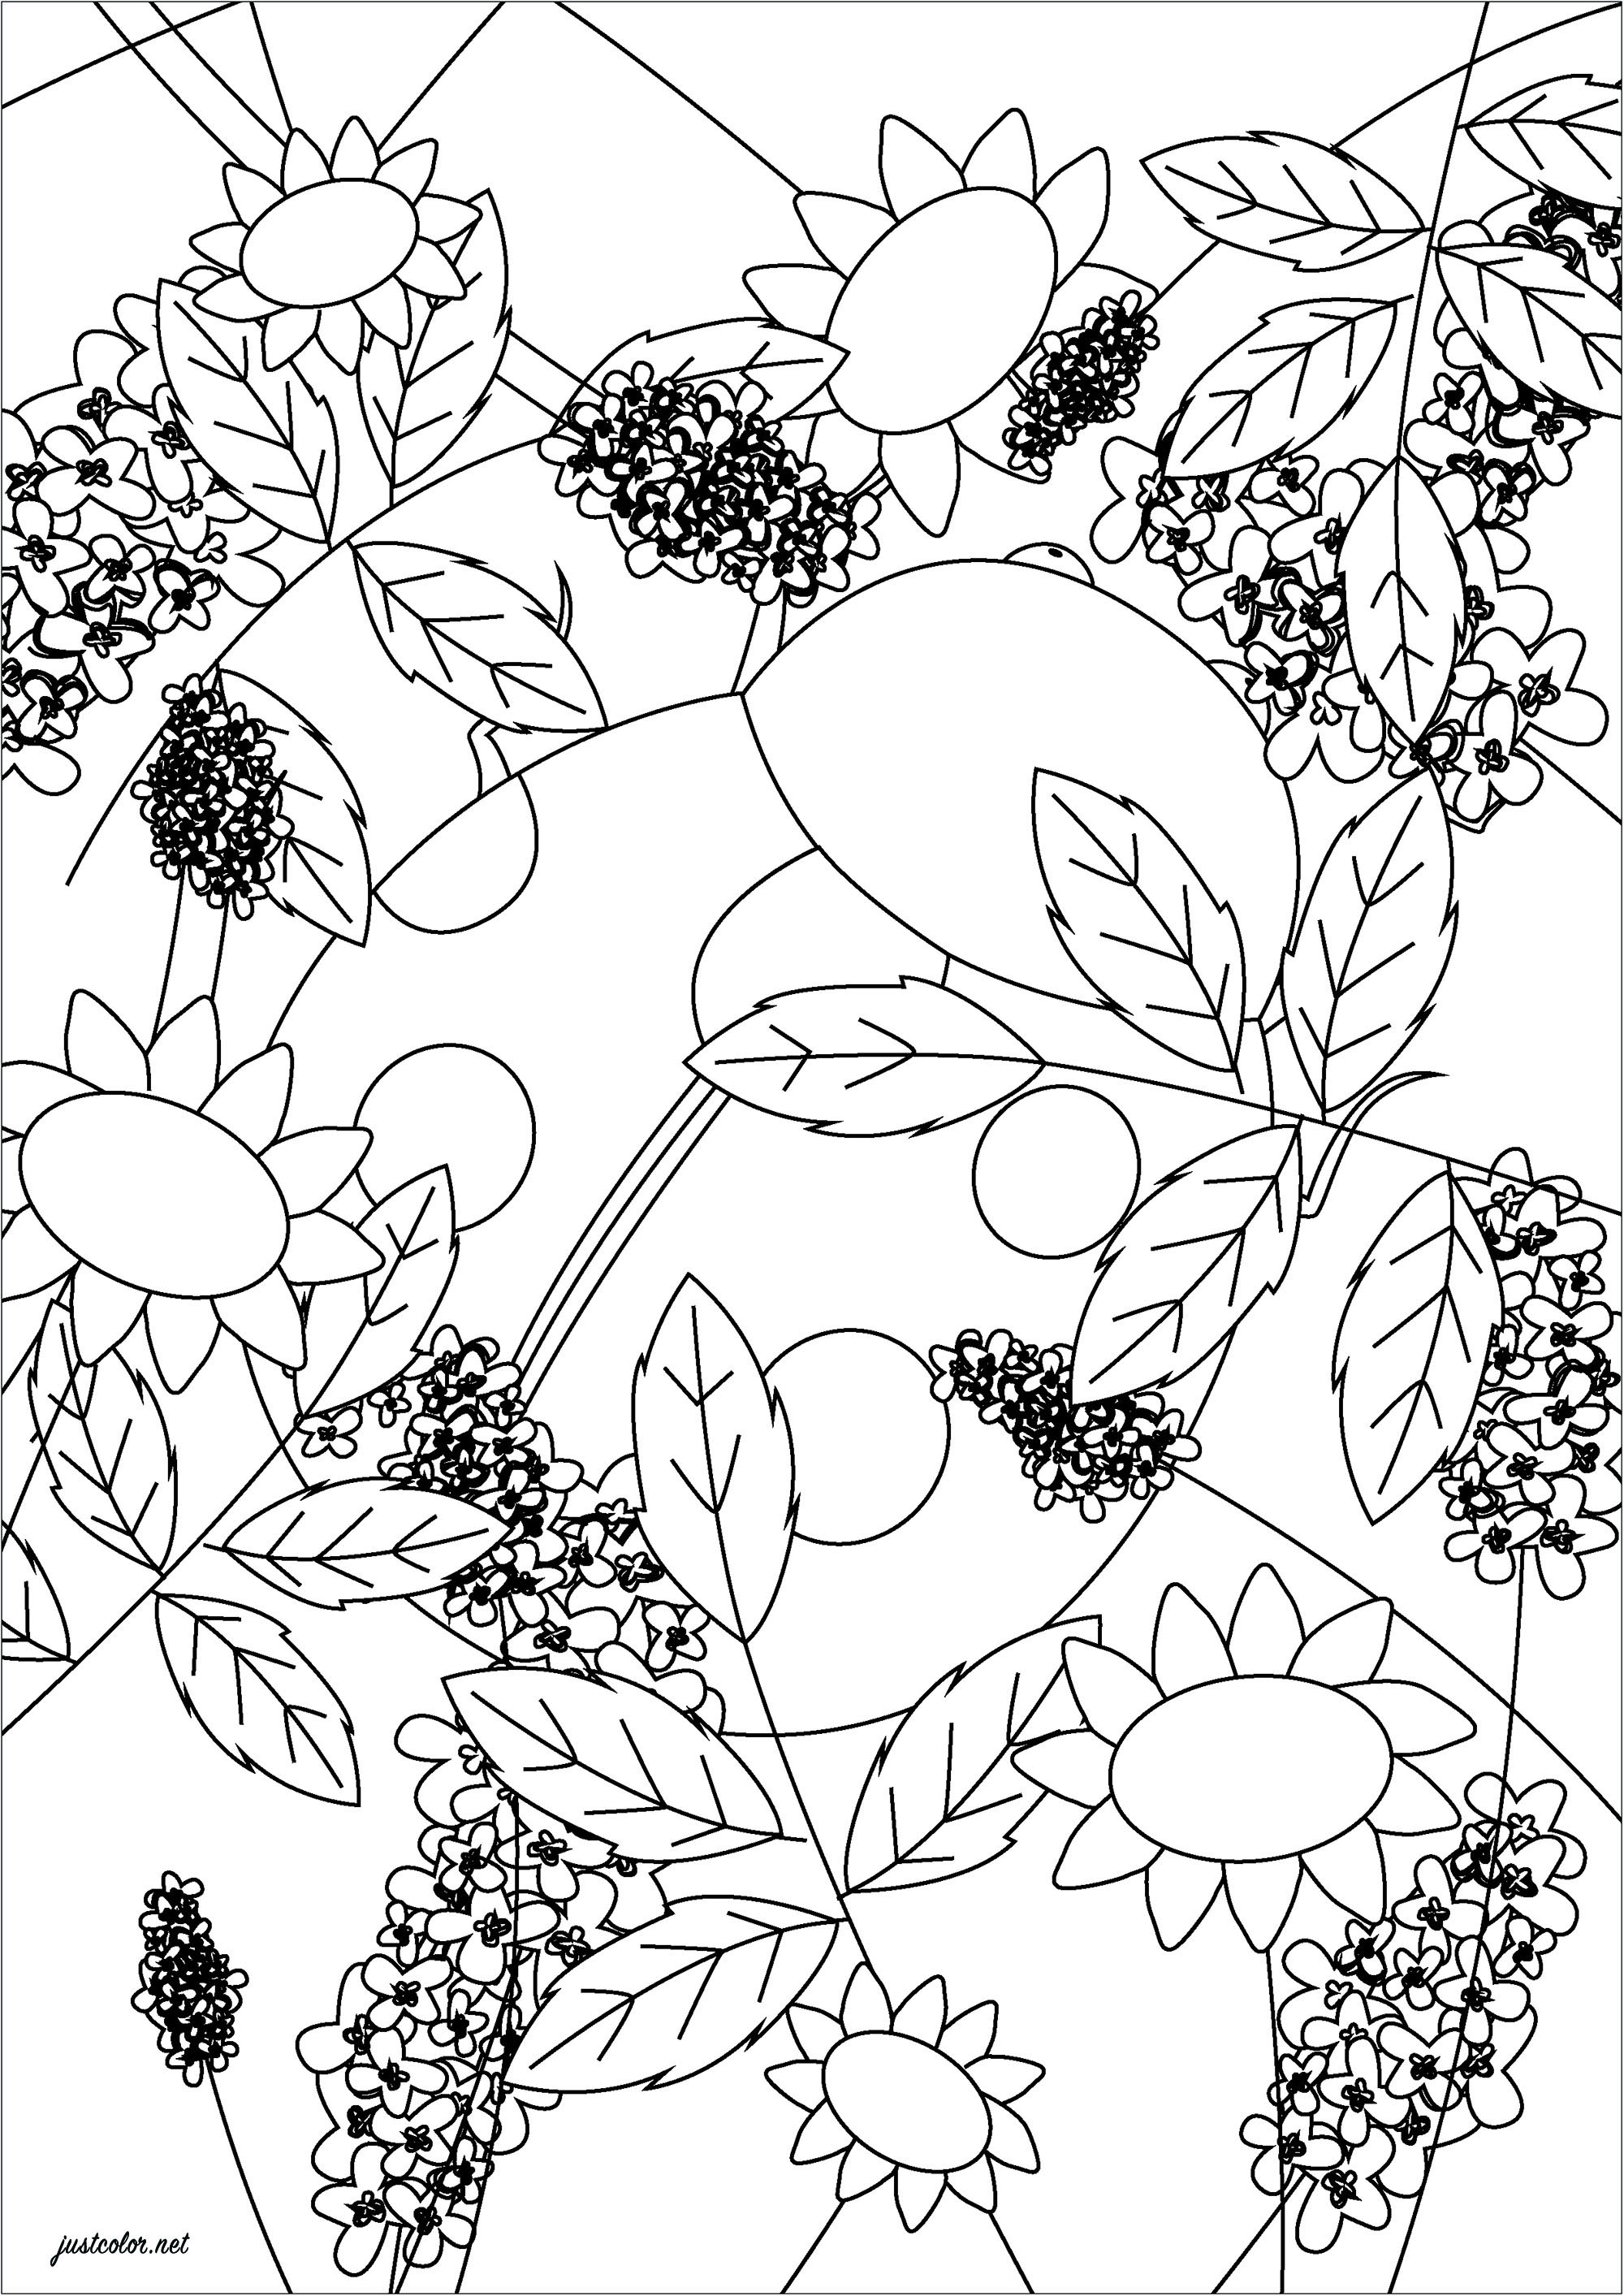 Coloring page of leavesWith beautiful shades of green, these leaves will be even prettier